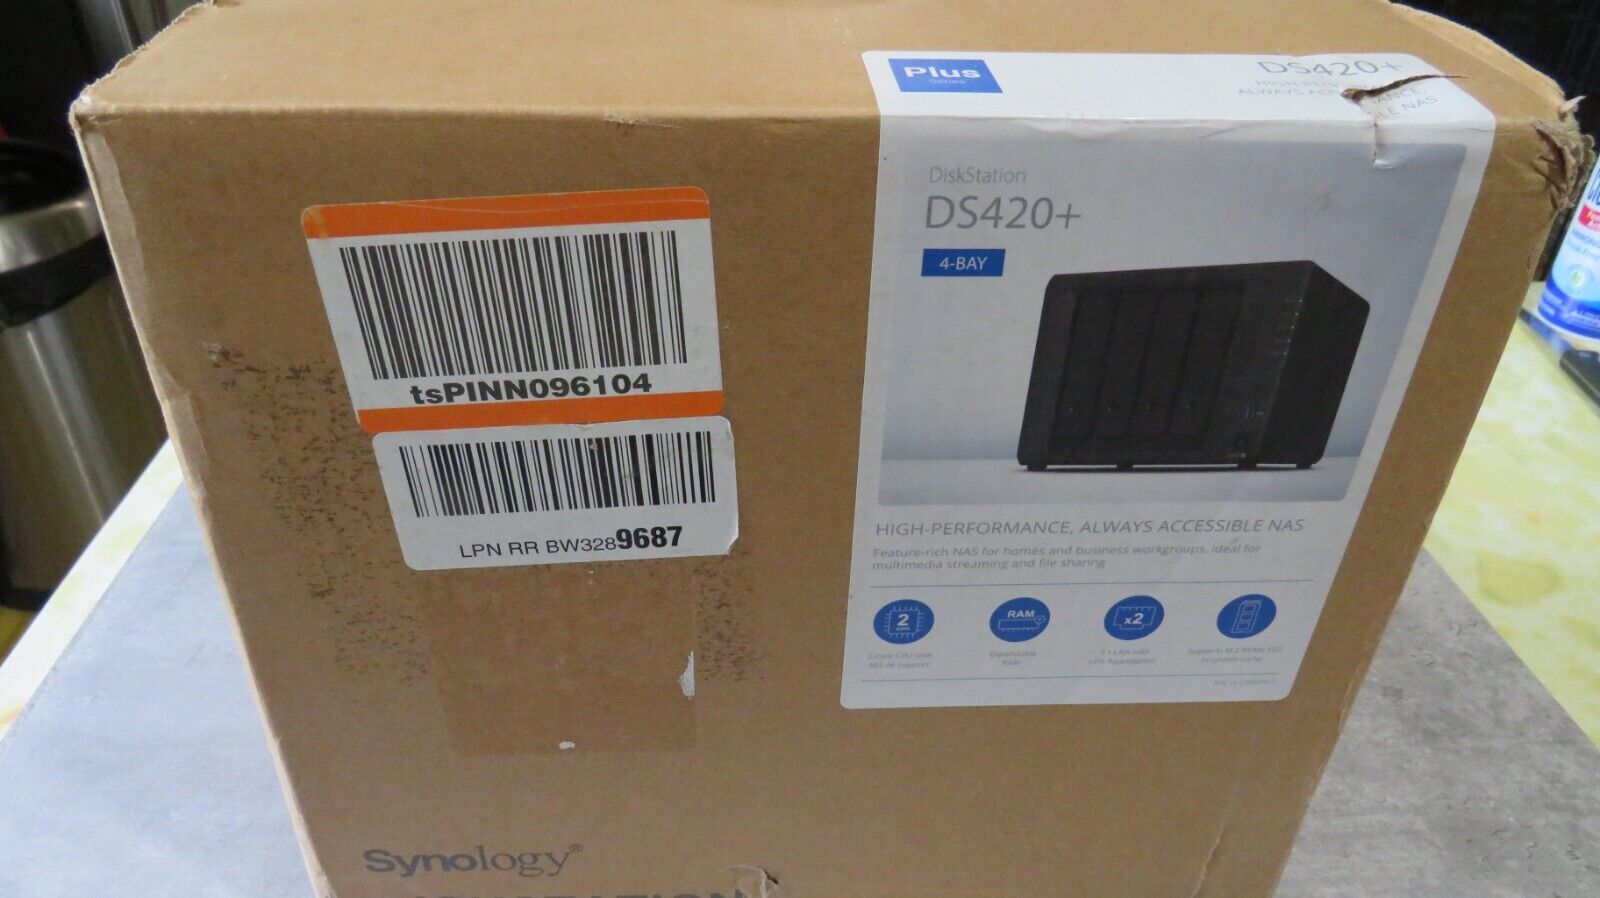 Synology DS420+ 4 Bay NAS Storage Array